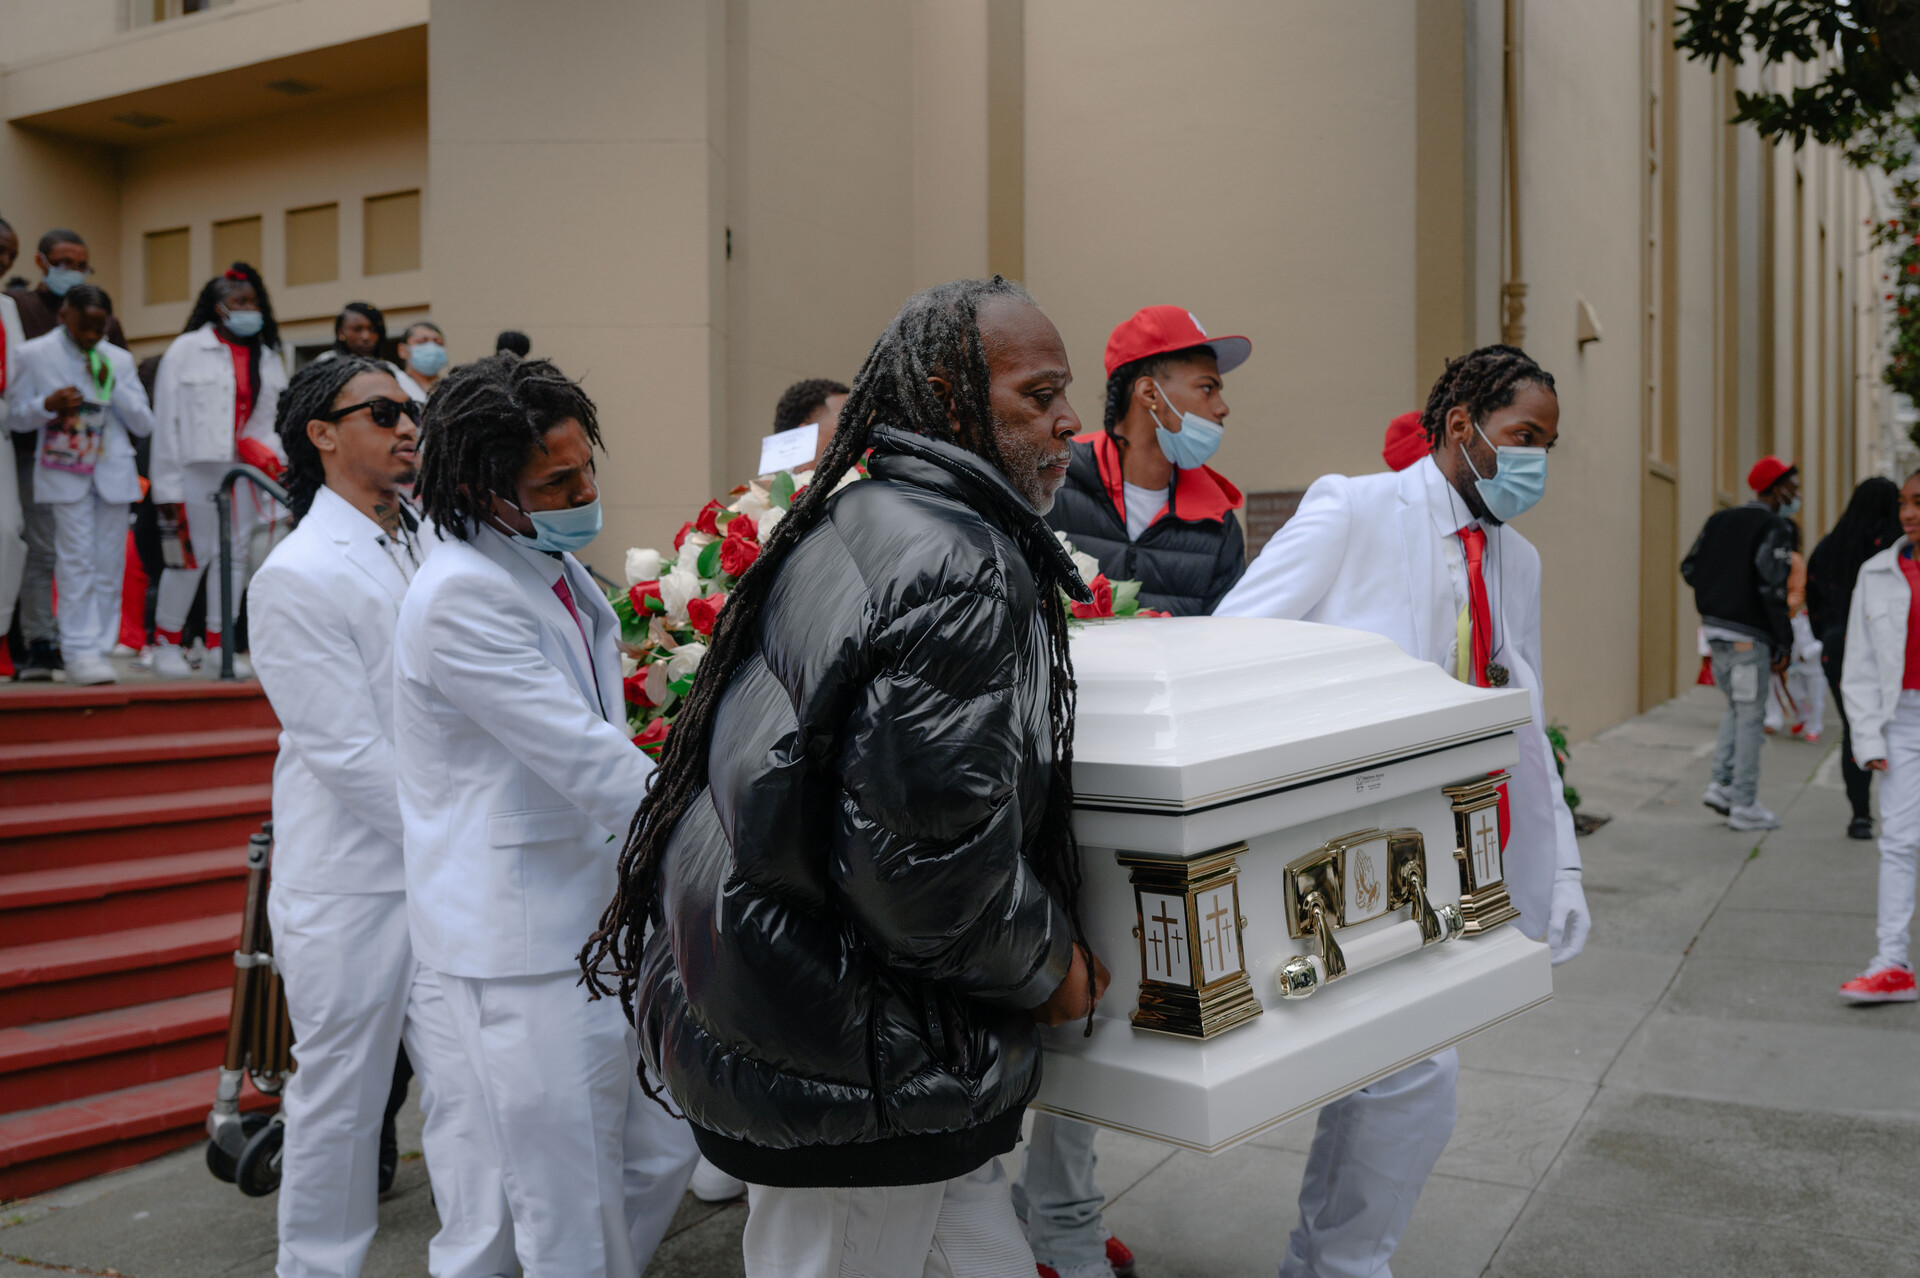 African American men carry a white coffin to a hearse outside a church.